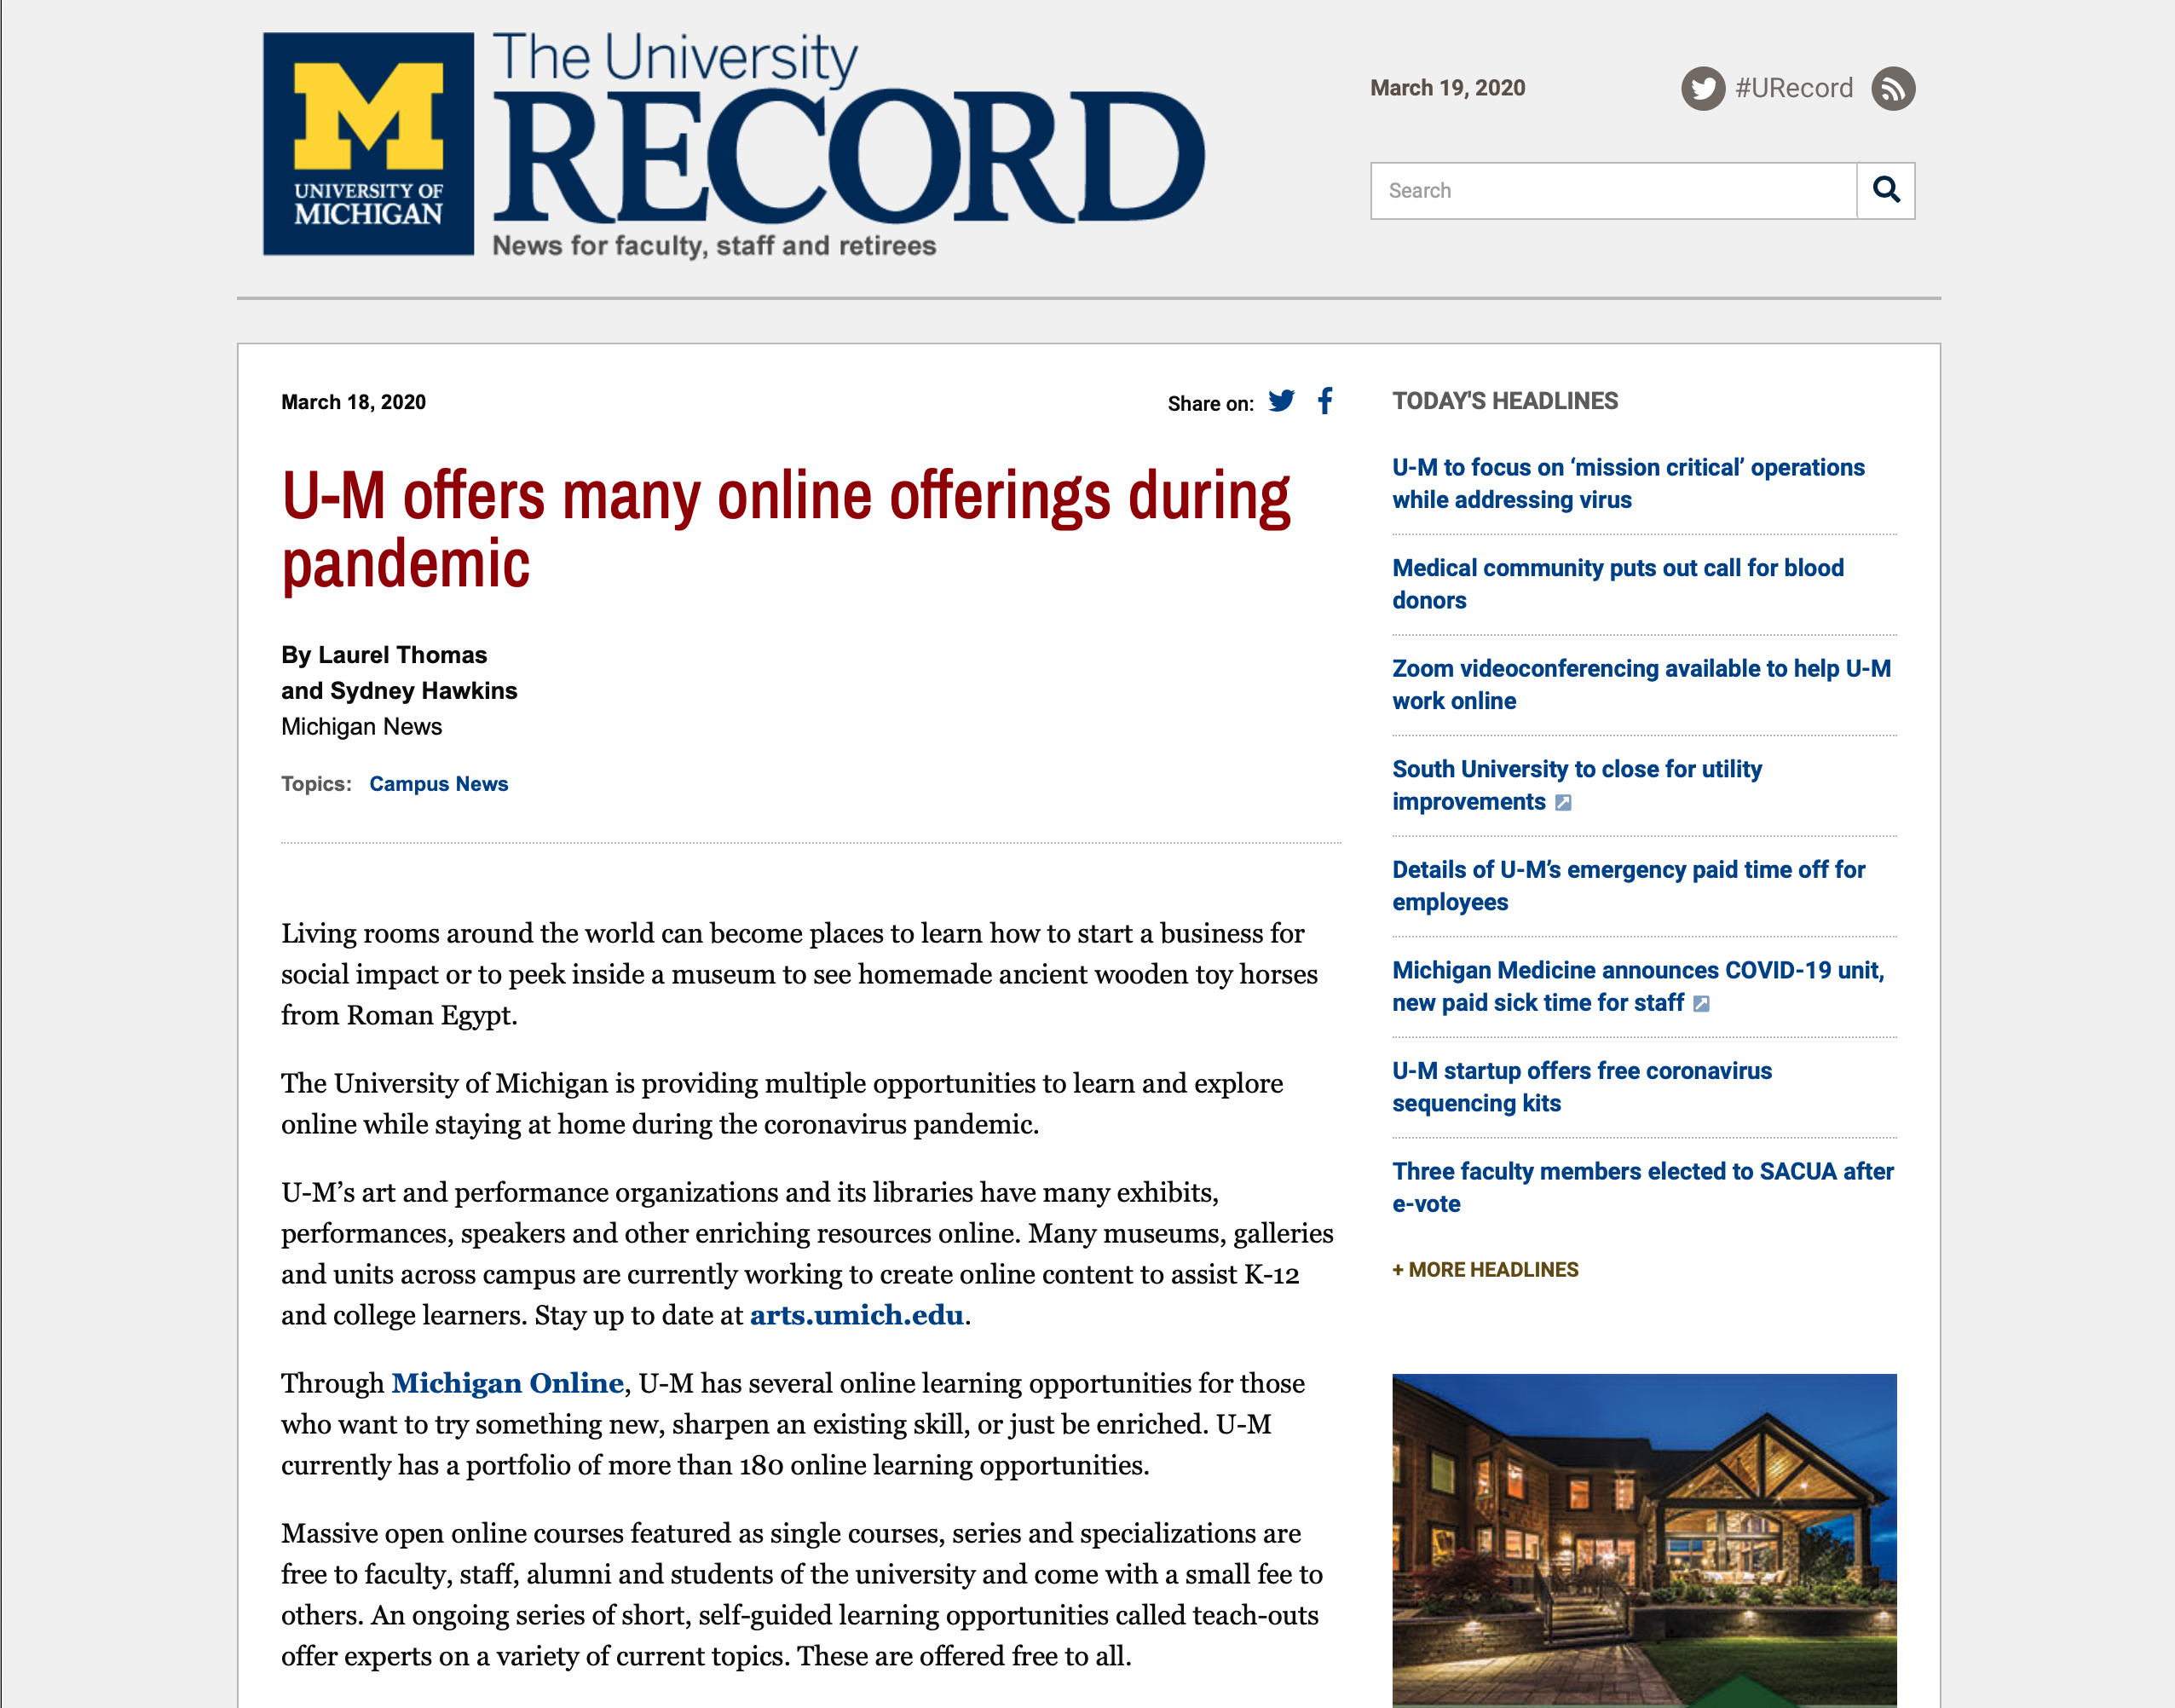 U-M offers many online offerings during pandemic